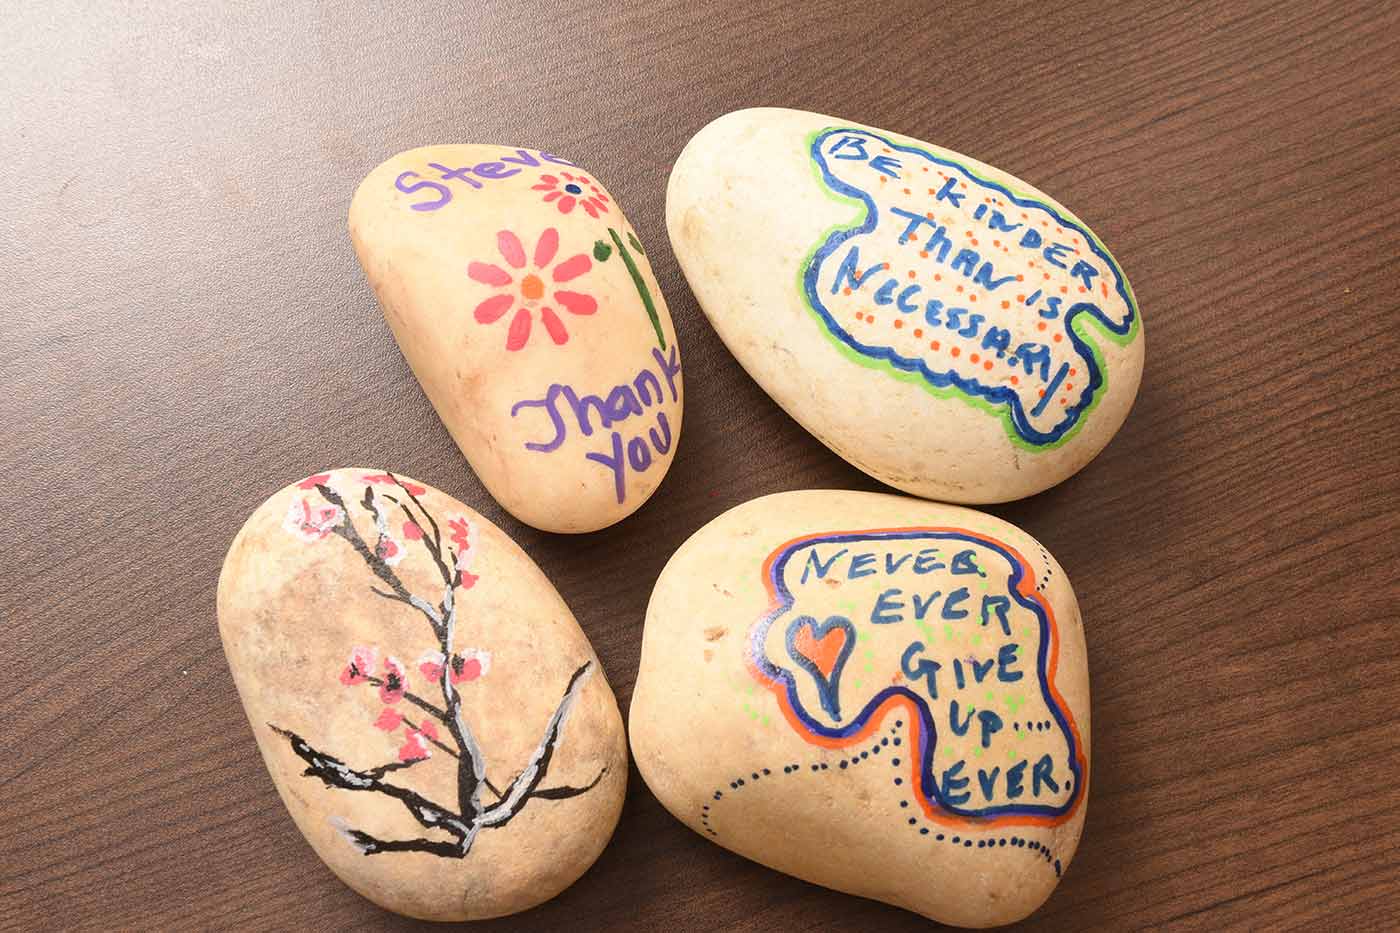 Painted rocks with emotional learning messages on them